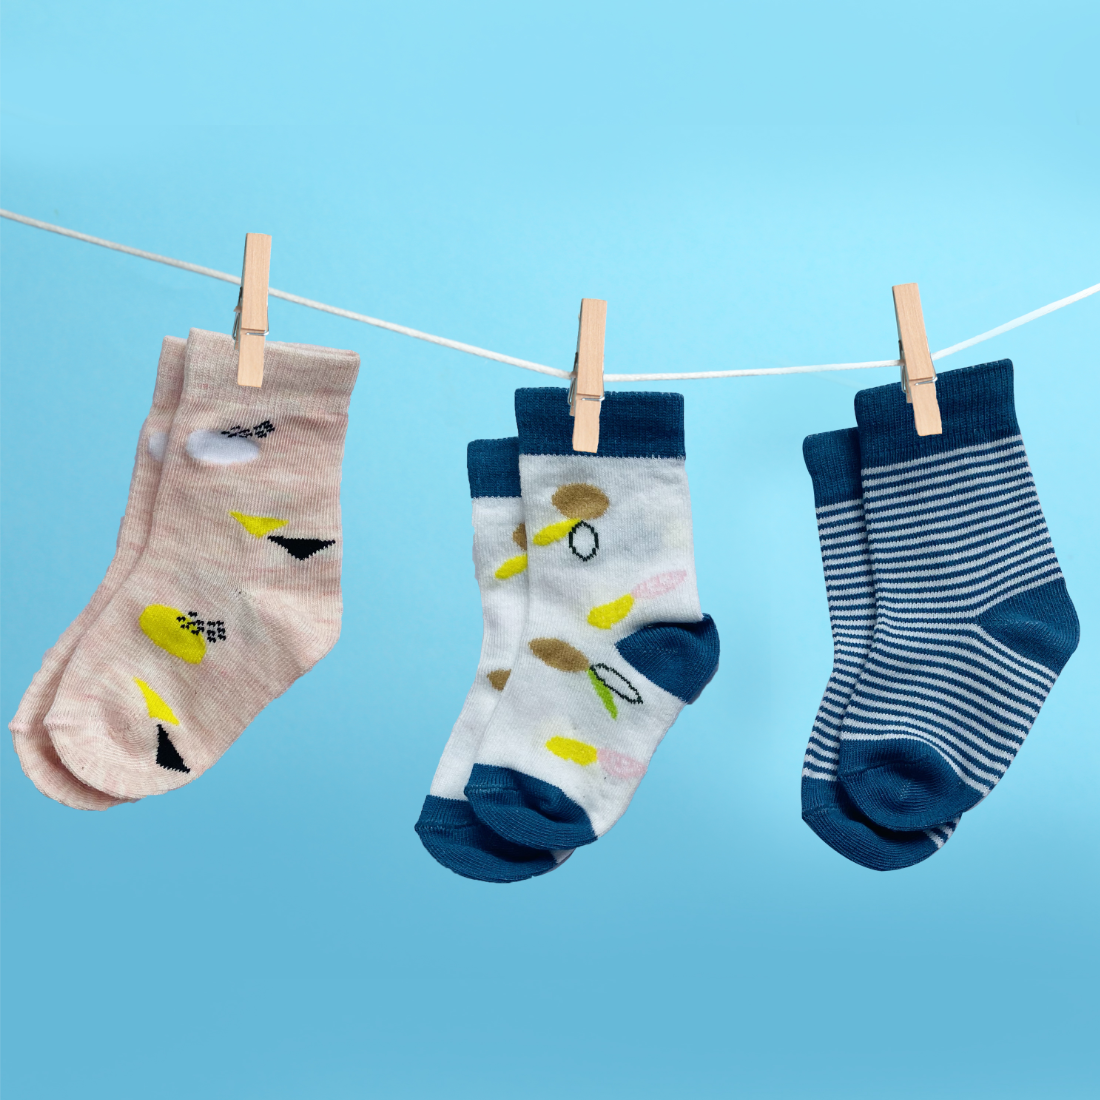 Antibacterial Baby Socks - Elasticated & Ankle Length - (0-6 Months) Unisex Blue Striped & Floral